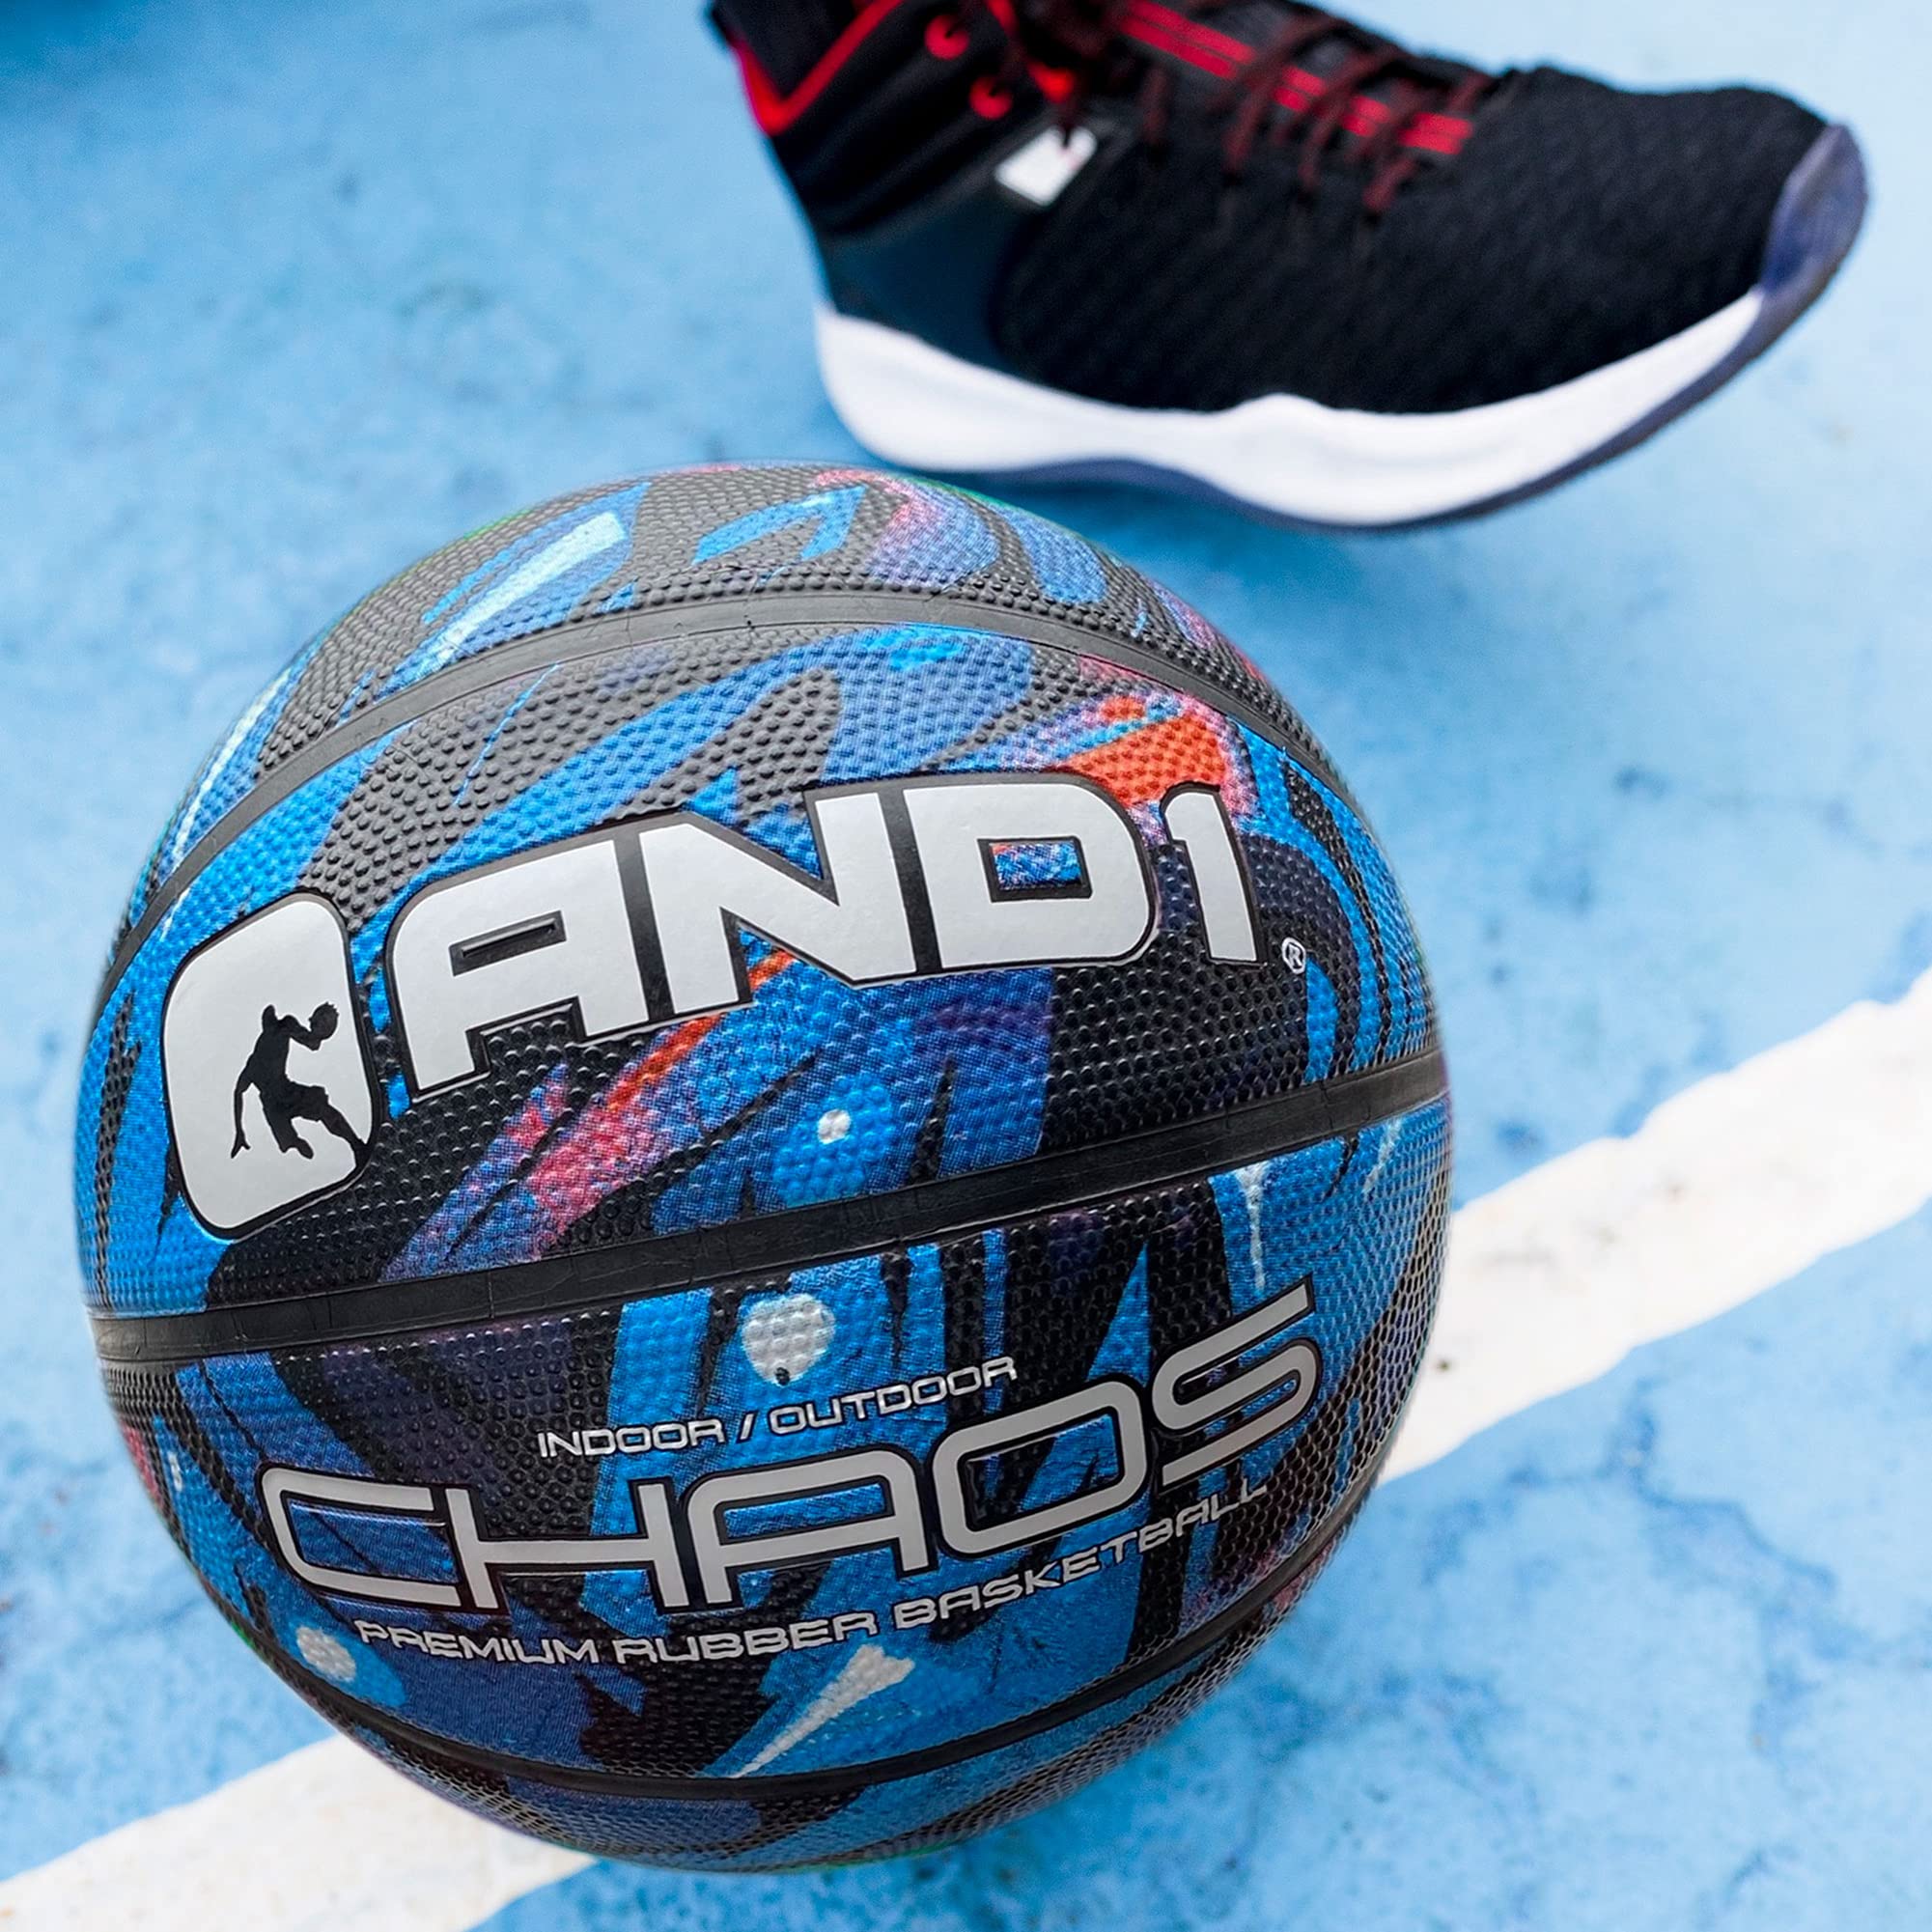 AND1 Chaos Basketball: Official Regulation Size 7 (29.5 inches) Rubber Basketball - Deep Channel Construction Streetball, Made for Indoor Outdoor Basketball Games